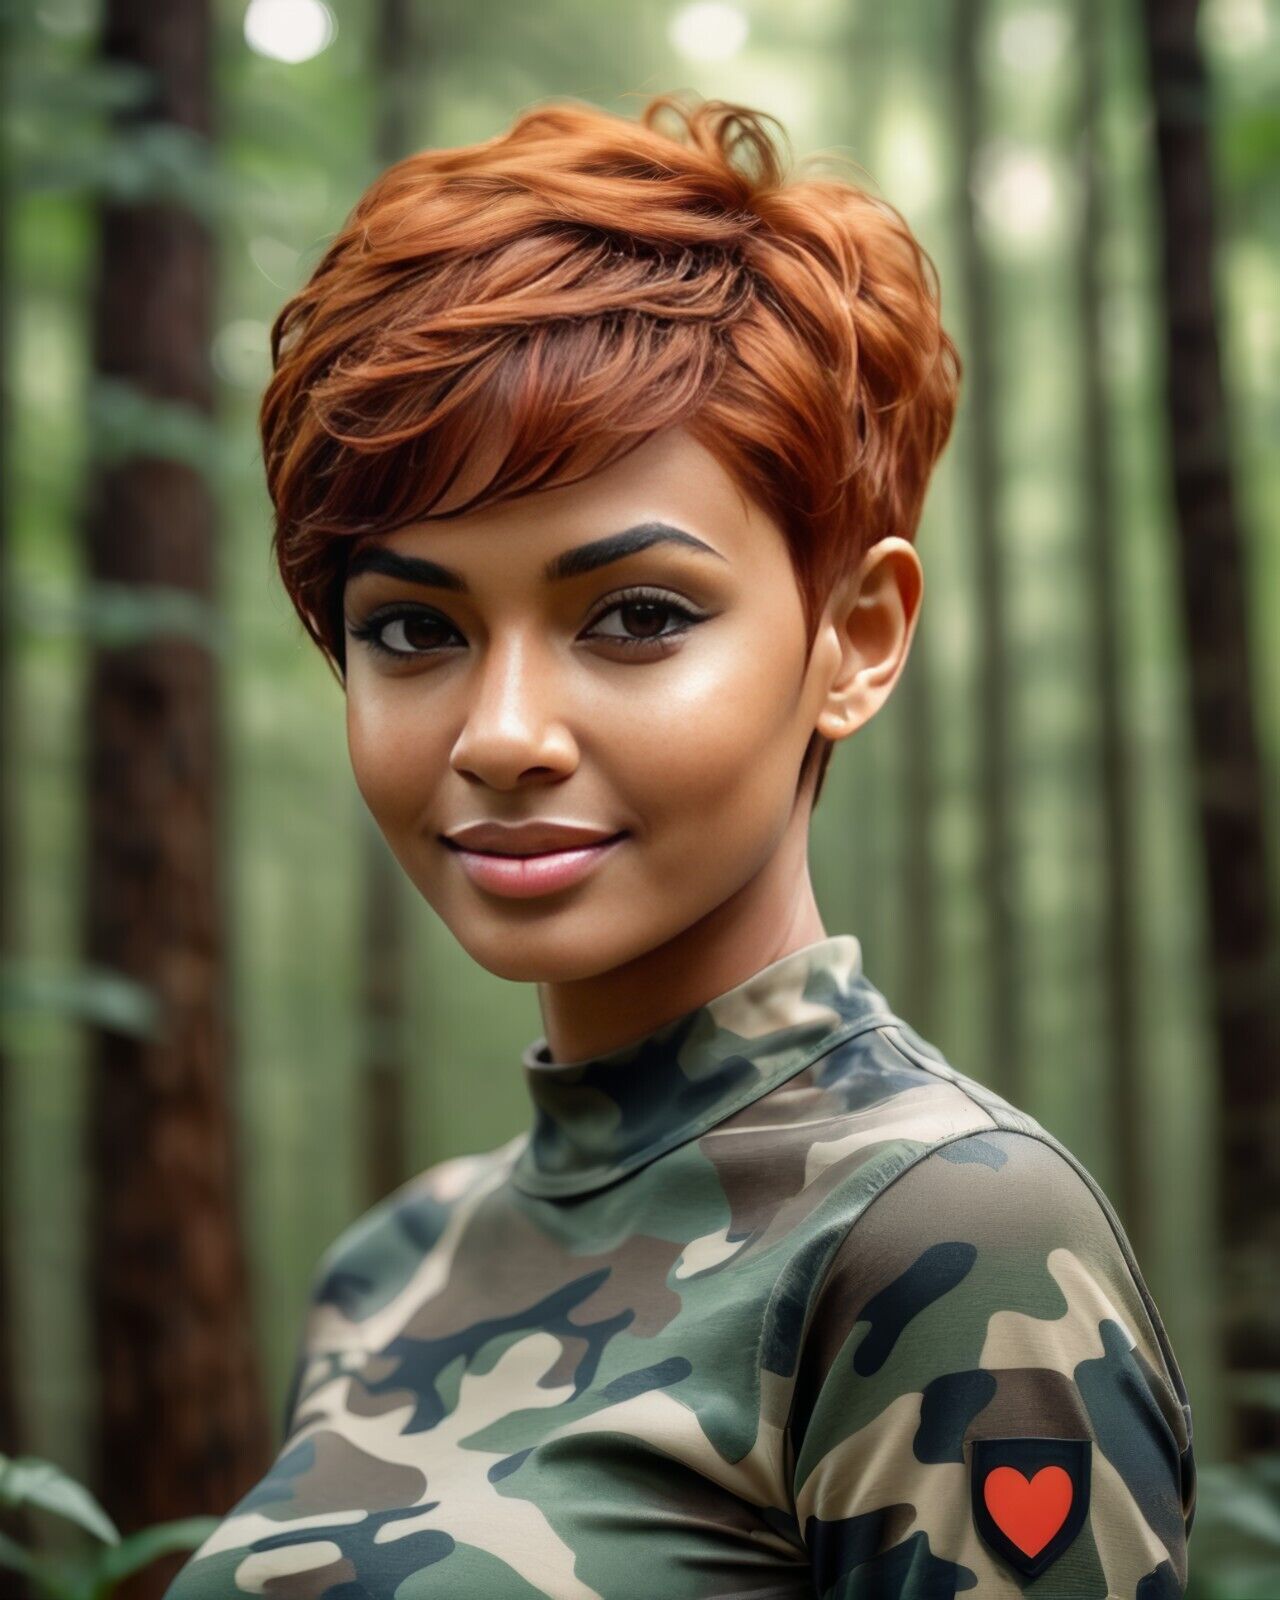 GORGEOUS CUTE SEXY MILITARY LADY WEARING CAMO 8X10 FANTASY PHOTO